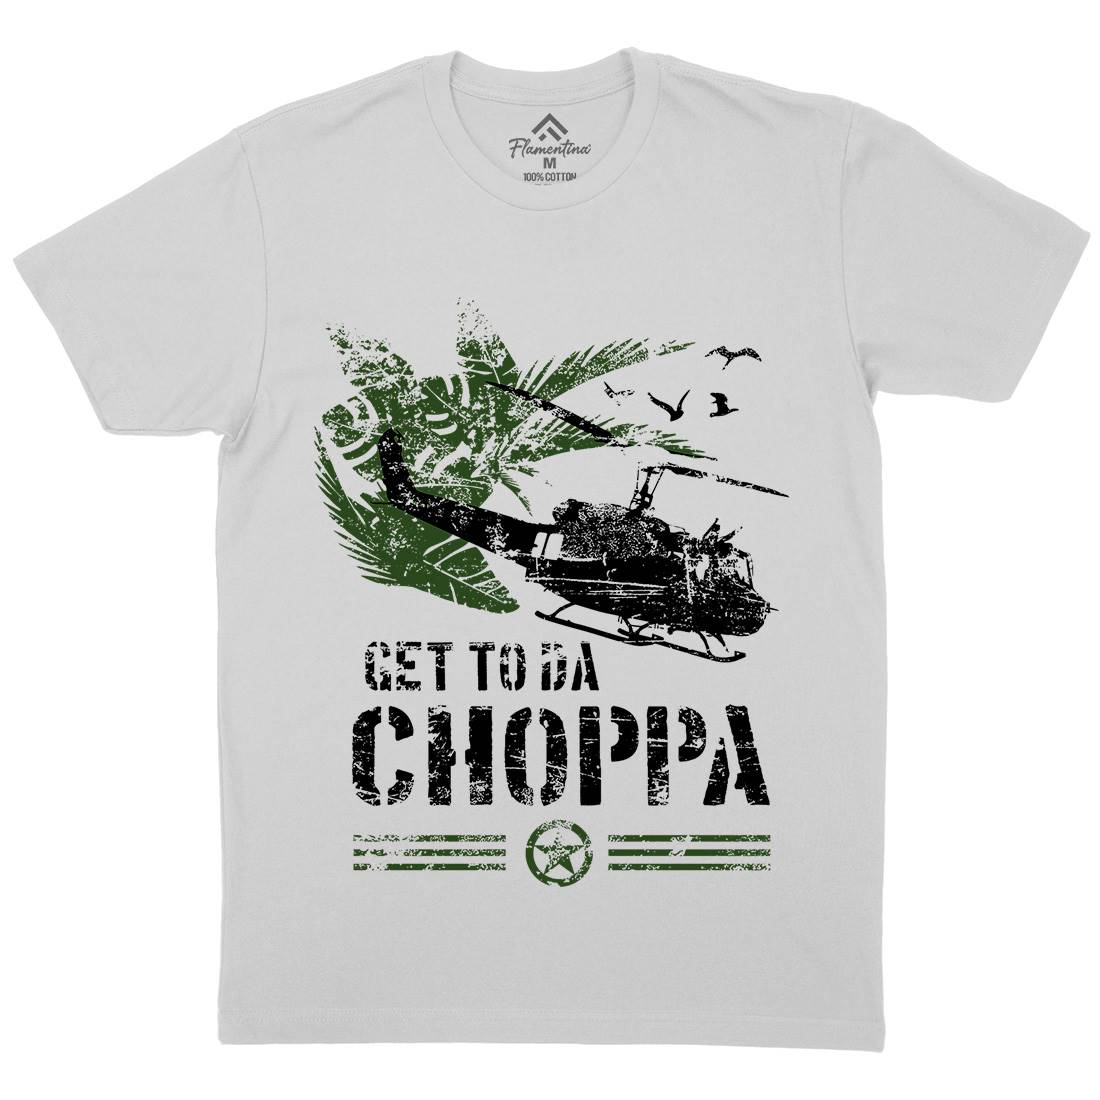 Get To The Chopper Mens Crew Neck T-Shirt Army D235